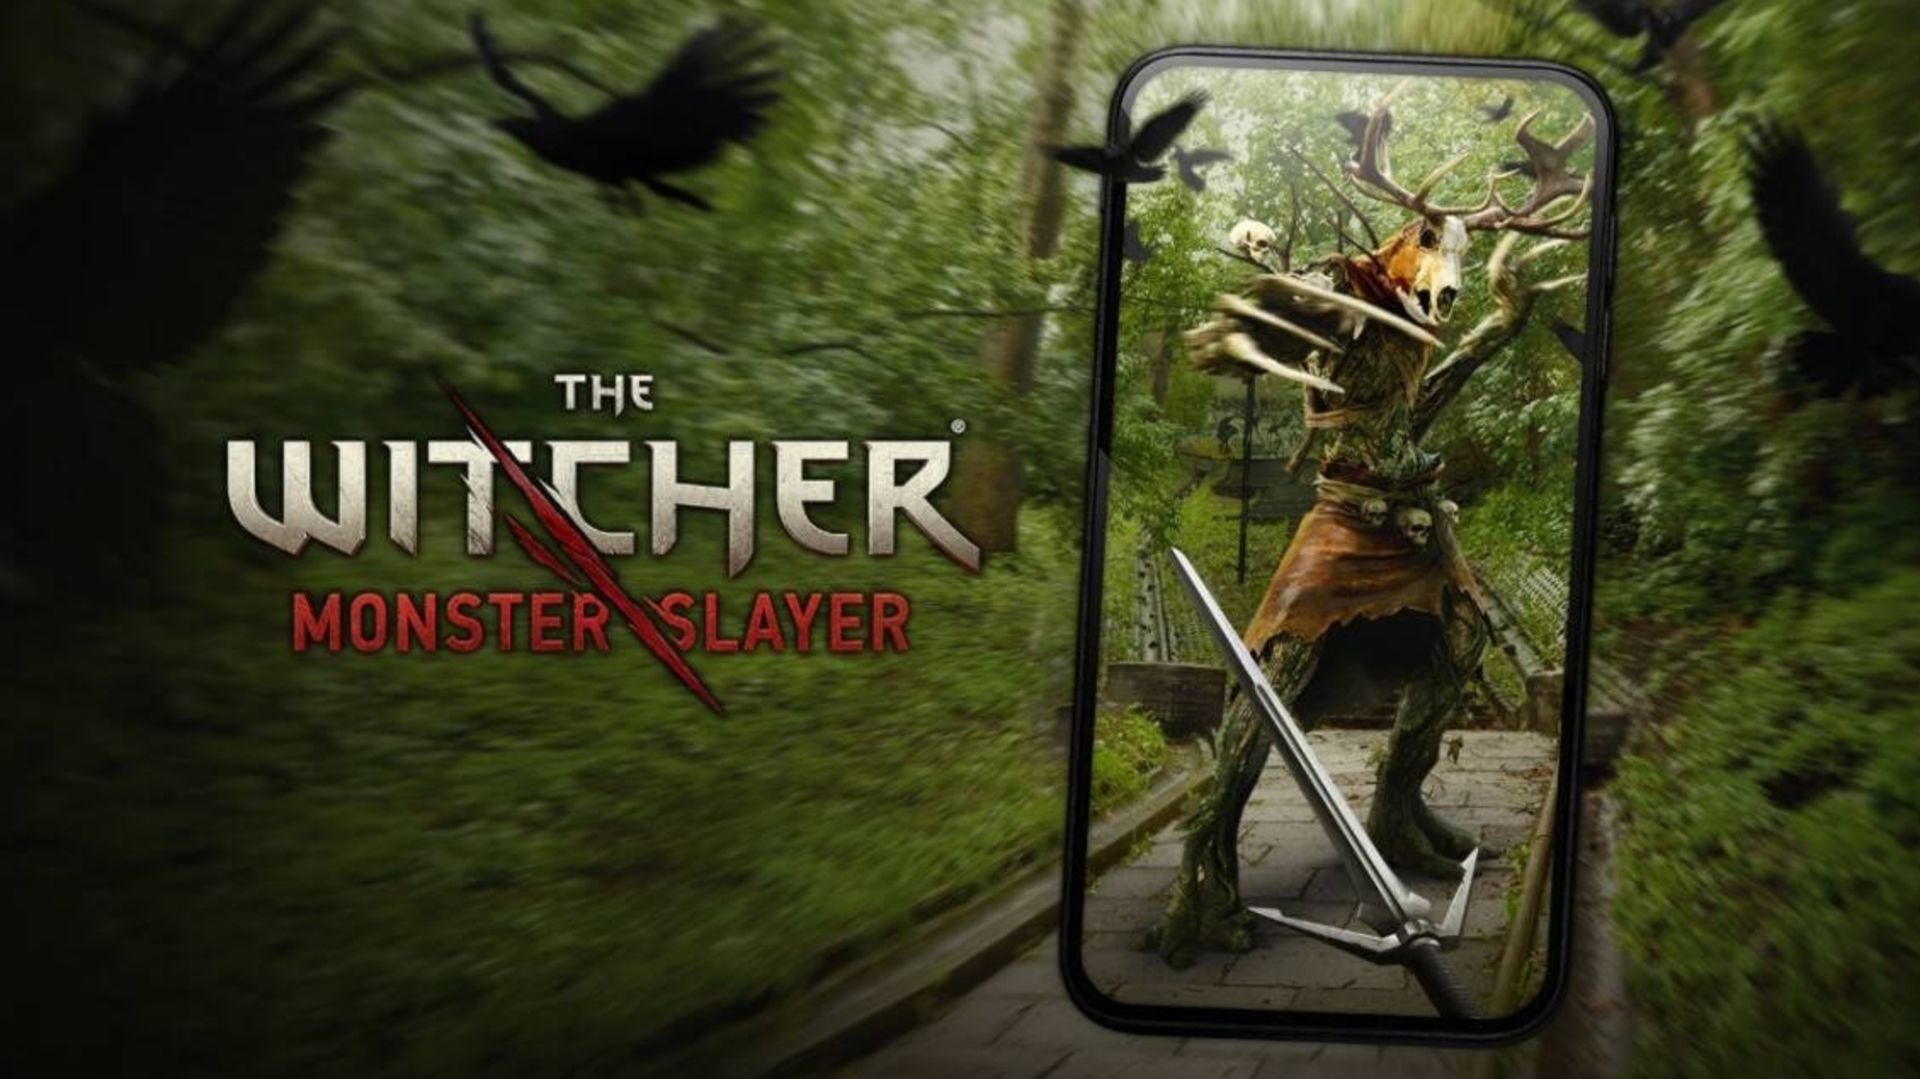 The Witcher: Monster Slayer Early Access